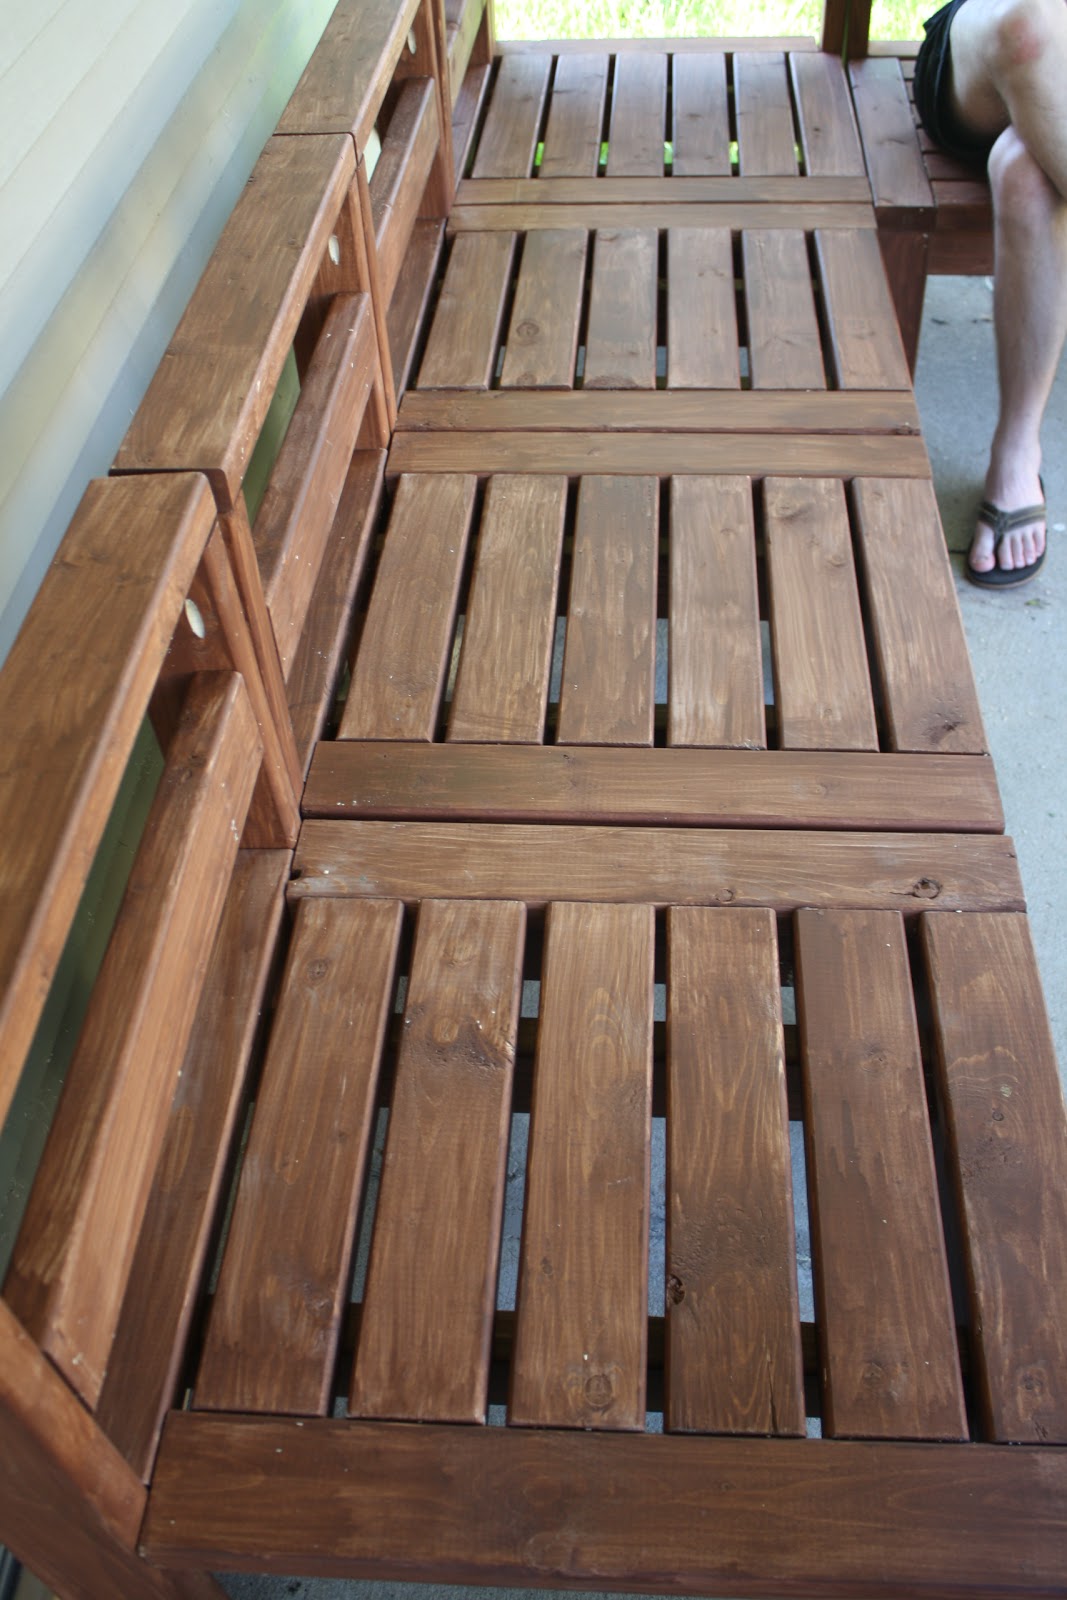 2 x 4 outdoor furniture plans